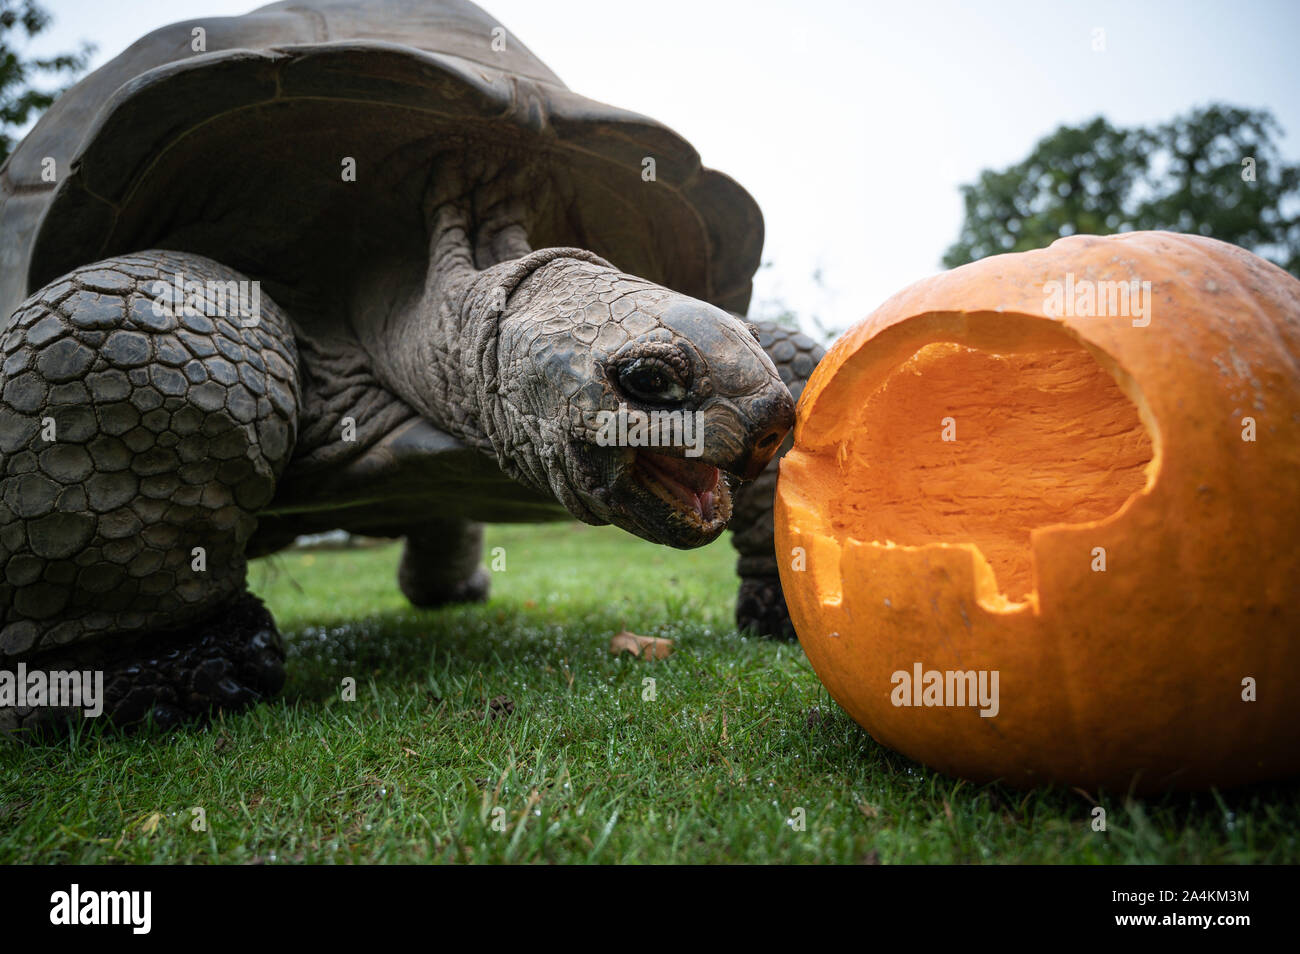 Cotswold Wildlife Park, Oxfordshire, UK. 15th Oct, 2019. Animals eat pumpkins carved with various designs, from spooky faces to impressions of the animals themselves. This giant tortoise is called Darwin and is about 30 years old. Credit: Andrew Walmsley/Alamy Live News Stock Photo